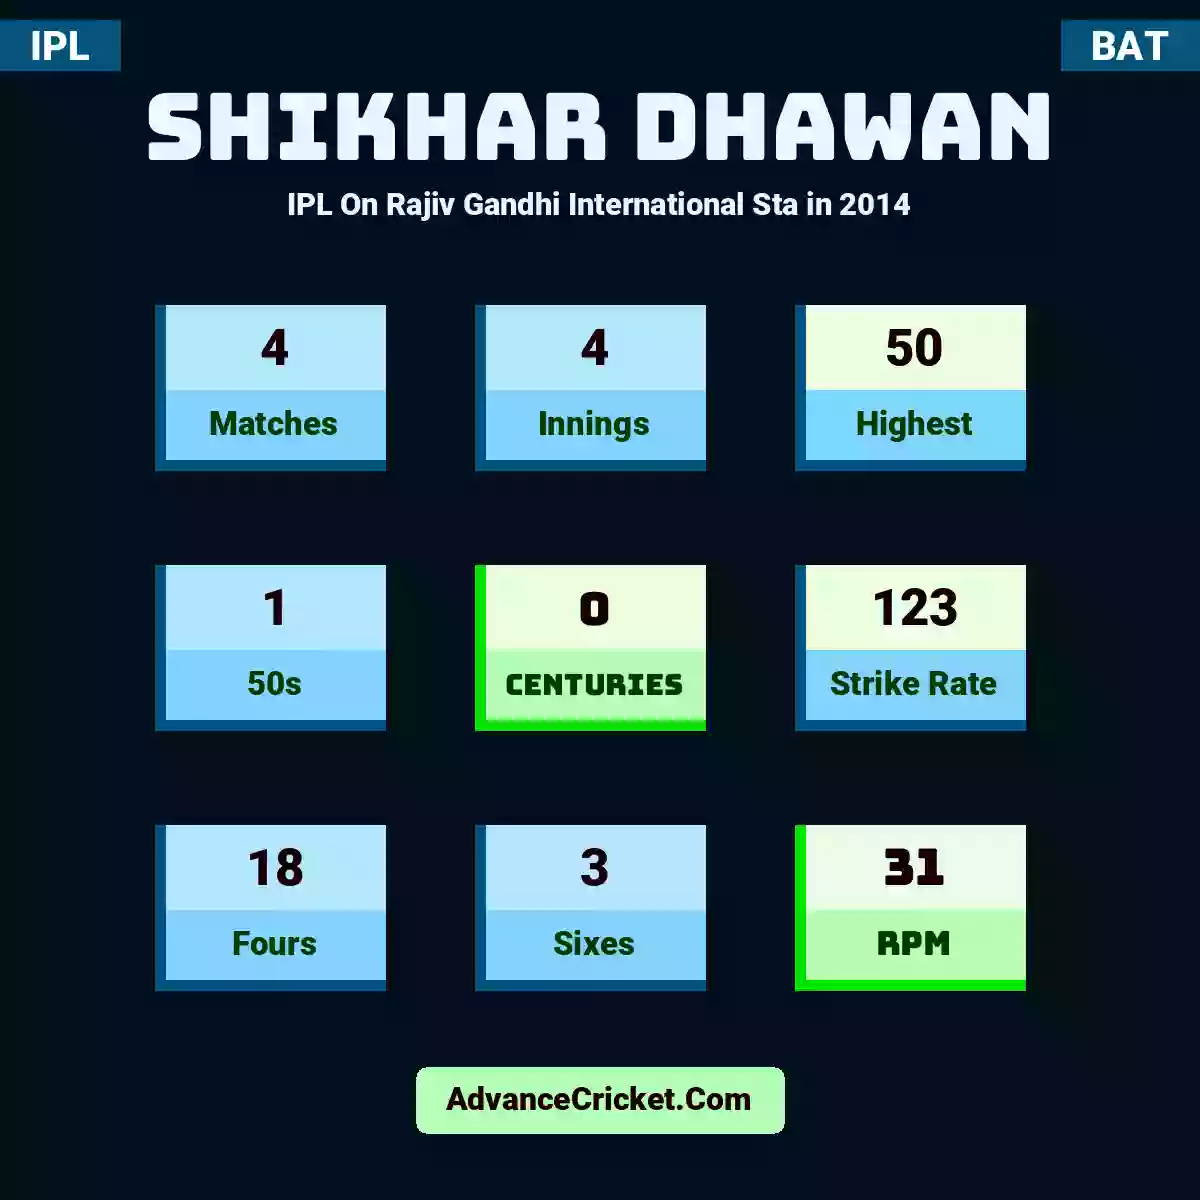 Shikhar Dhawan IPL  On Rajiv Gandhi International Sta in 2014, Shikhar Dhawan played 4 matches, scored 50 runs as highest, 1 half-centuries, and 0 centuries, with a strike rate of 123. S.Dhawan hit 18 fours and 3 sixes, with an RPM of 31.